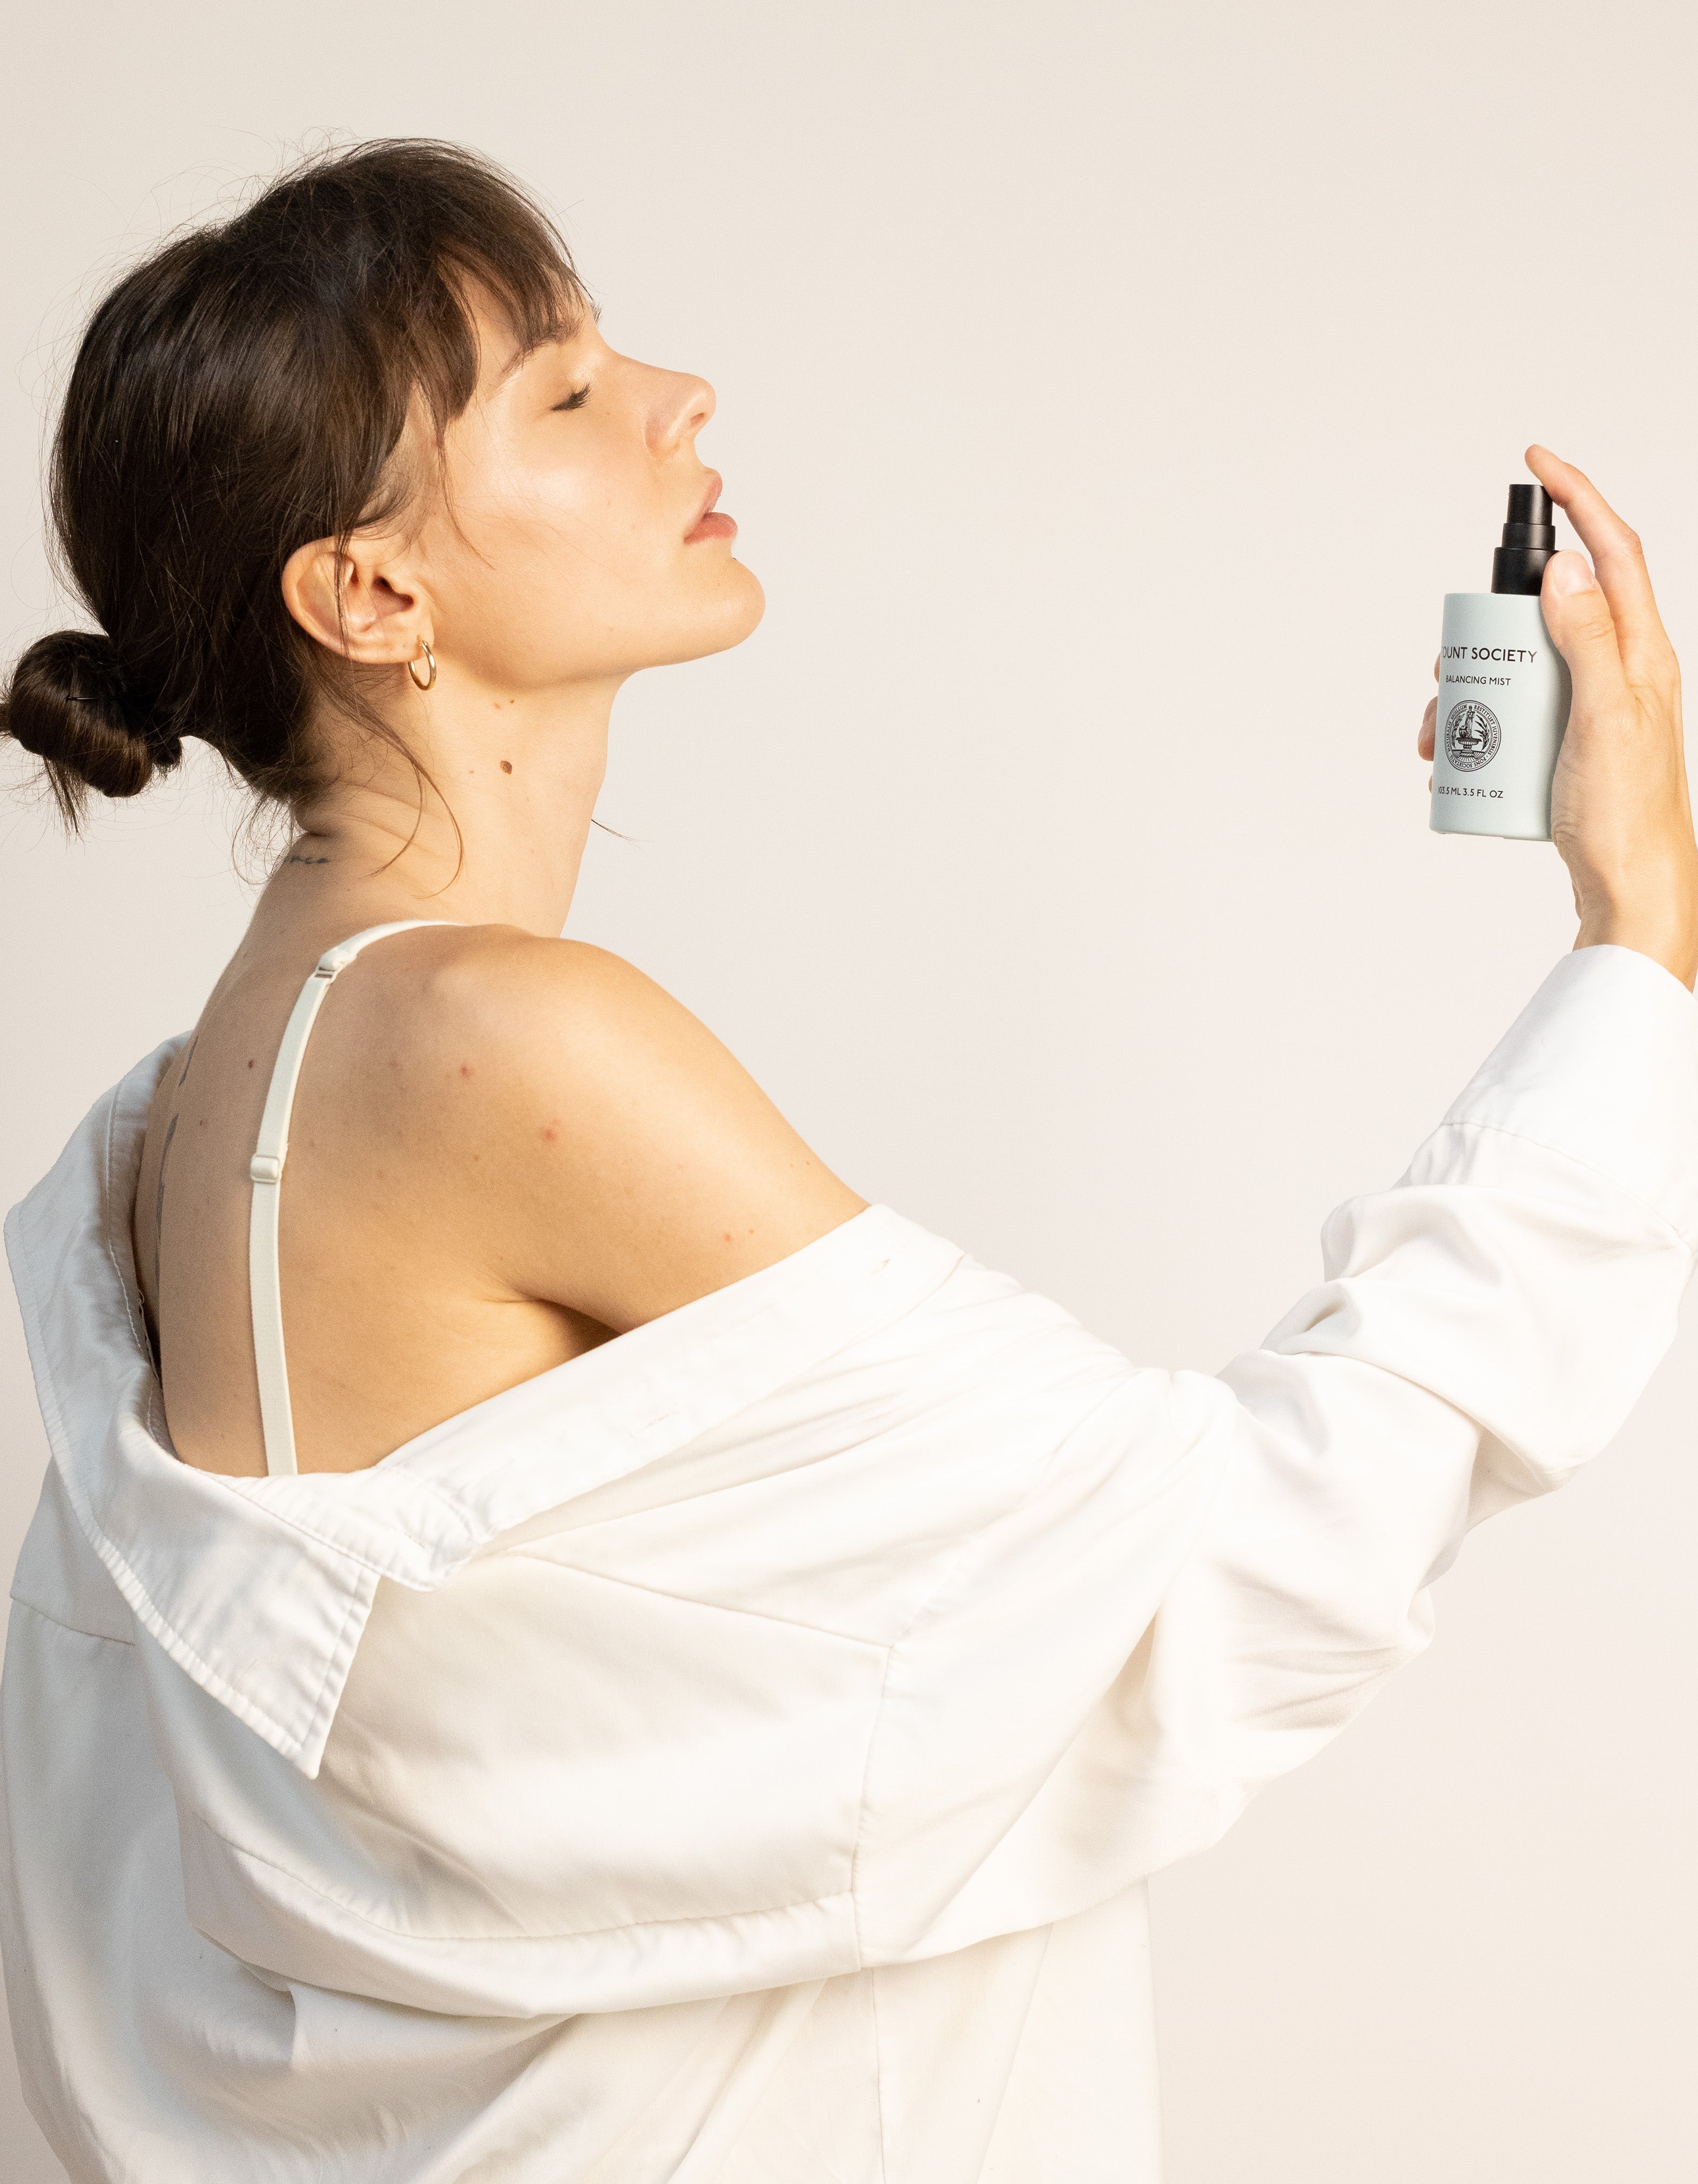 A woman with dark hair tied in a bun holds a bottle of Cozy Earth's Balancing Face Mist near her face, spraying it with a relaxed expression. She is wearing a white shirt that slips off one shoulder, revealing a white strap underneath. The background is plain and light-colored.